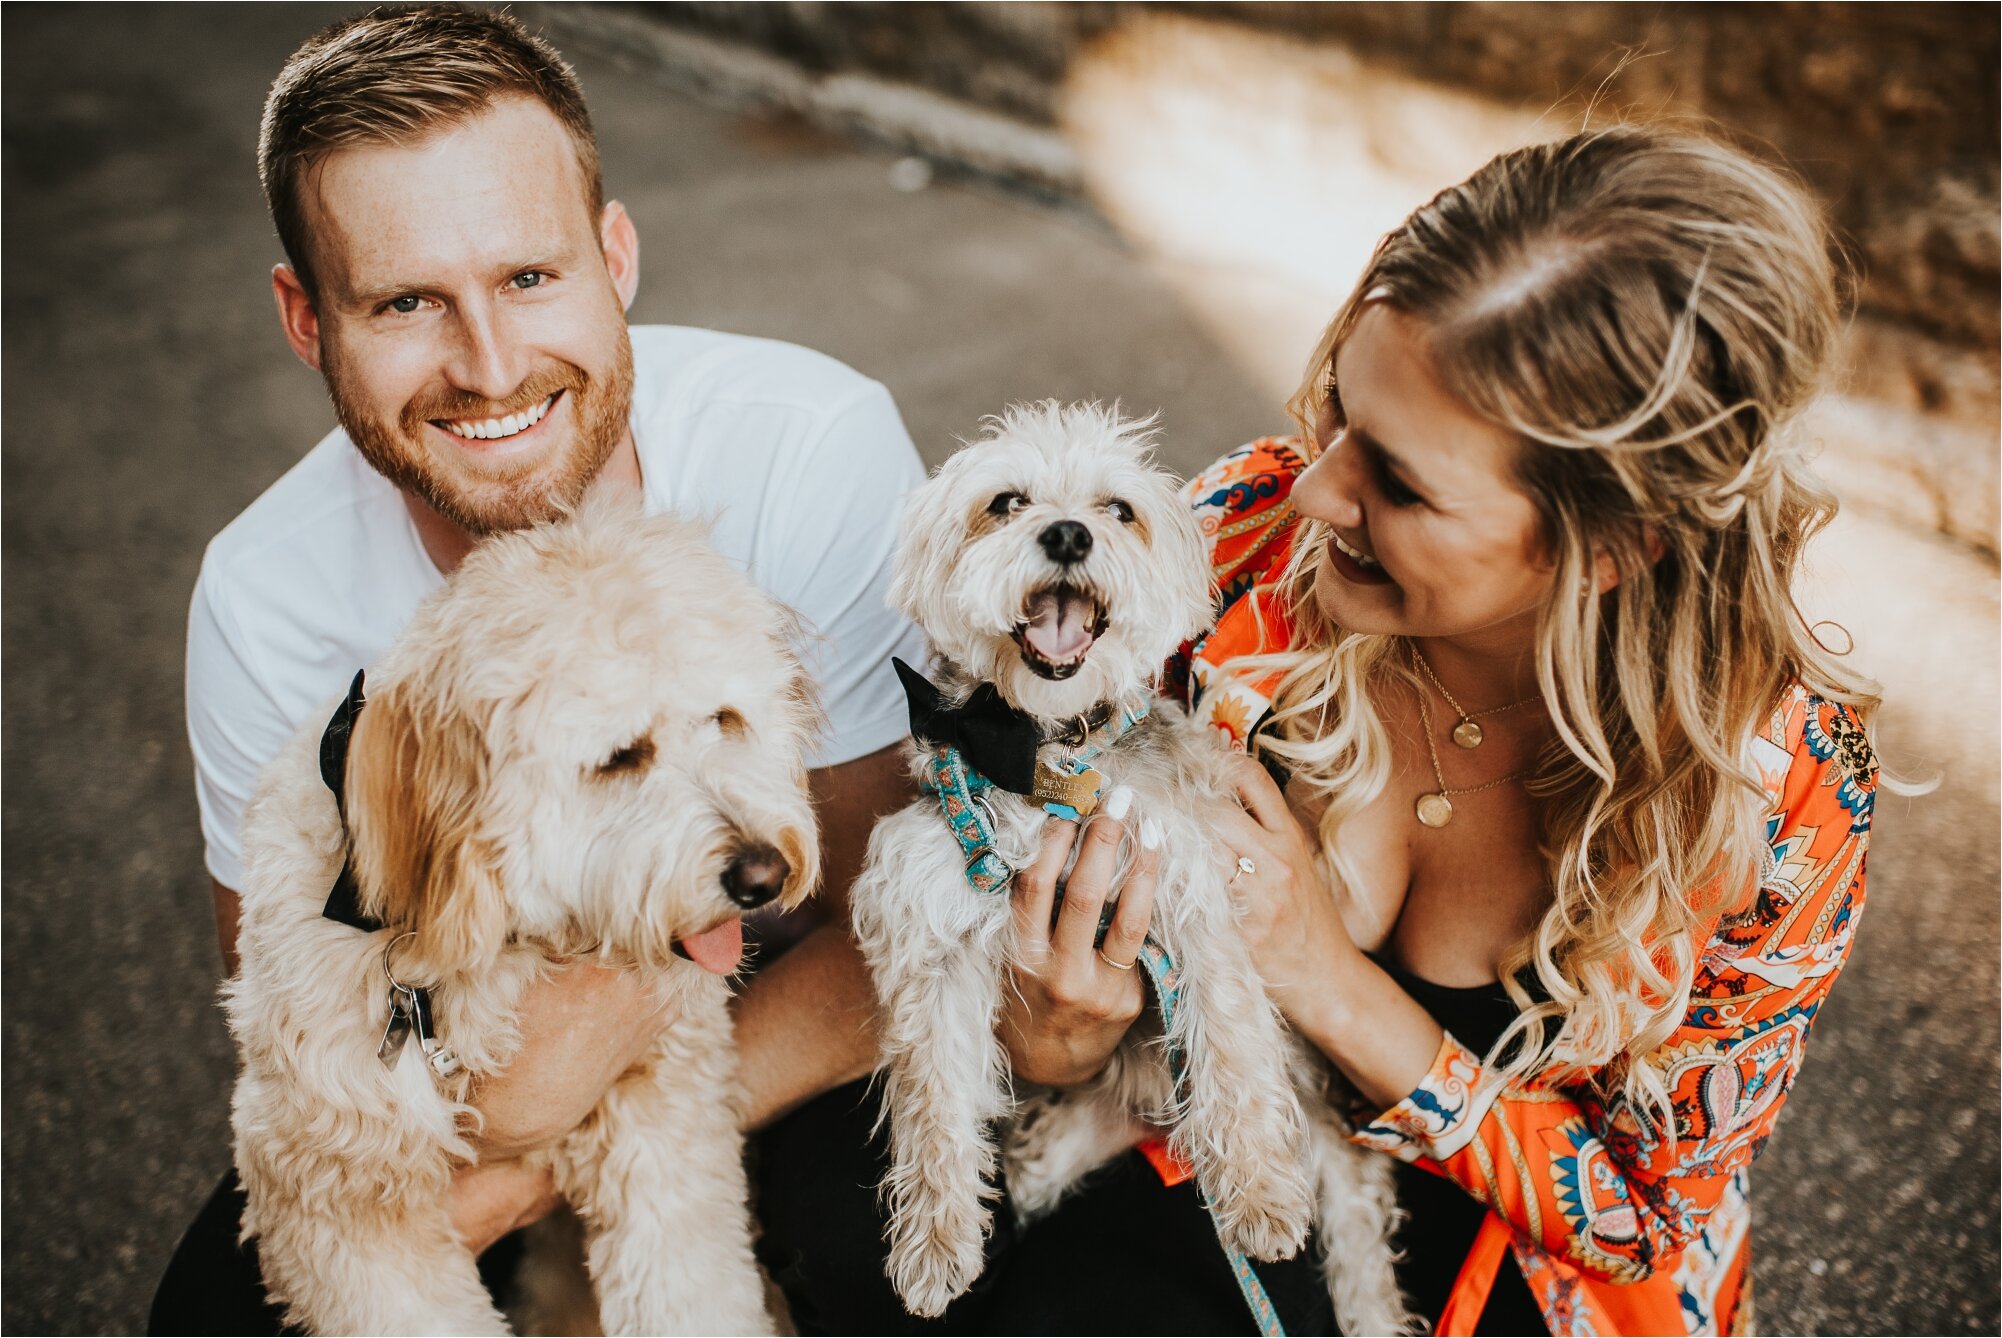  north loop minneapolis engagement session puppies dogs couple photographer engaged wedding minnesota photos 